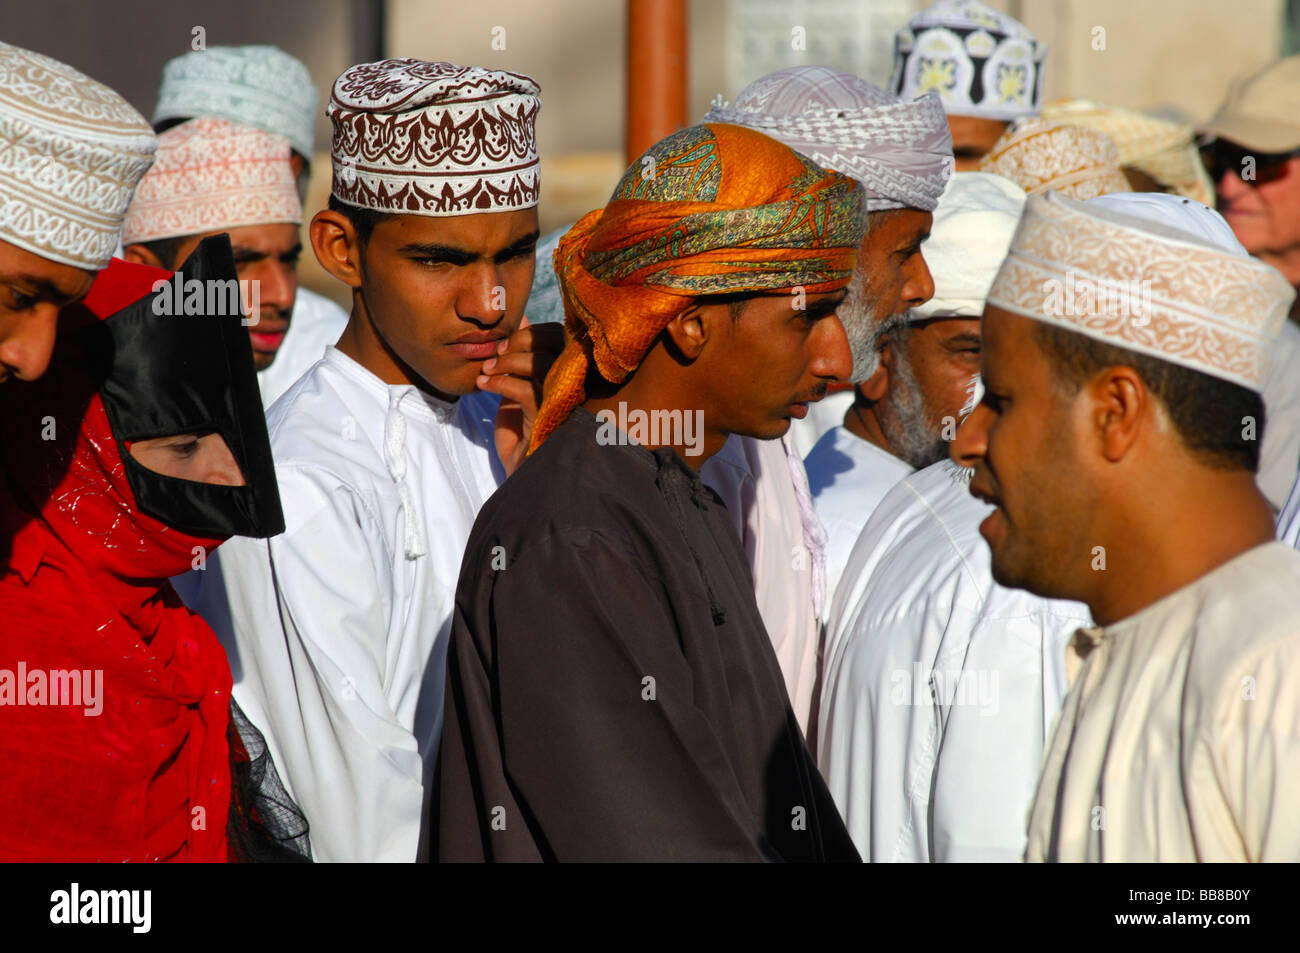 People from Oman, men wearing a national costume Dishdasha and a Kummah cape or a Mussar turban on the head, woman wearing a bu Stock Photo